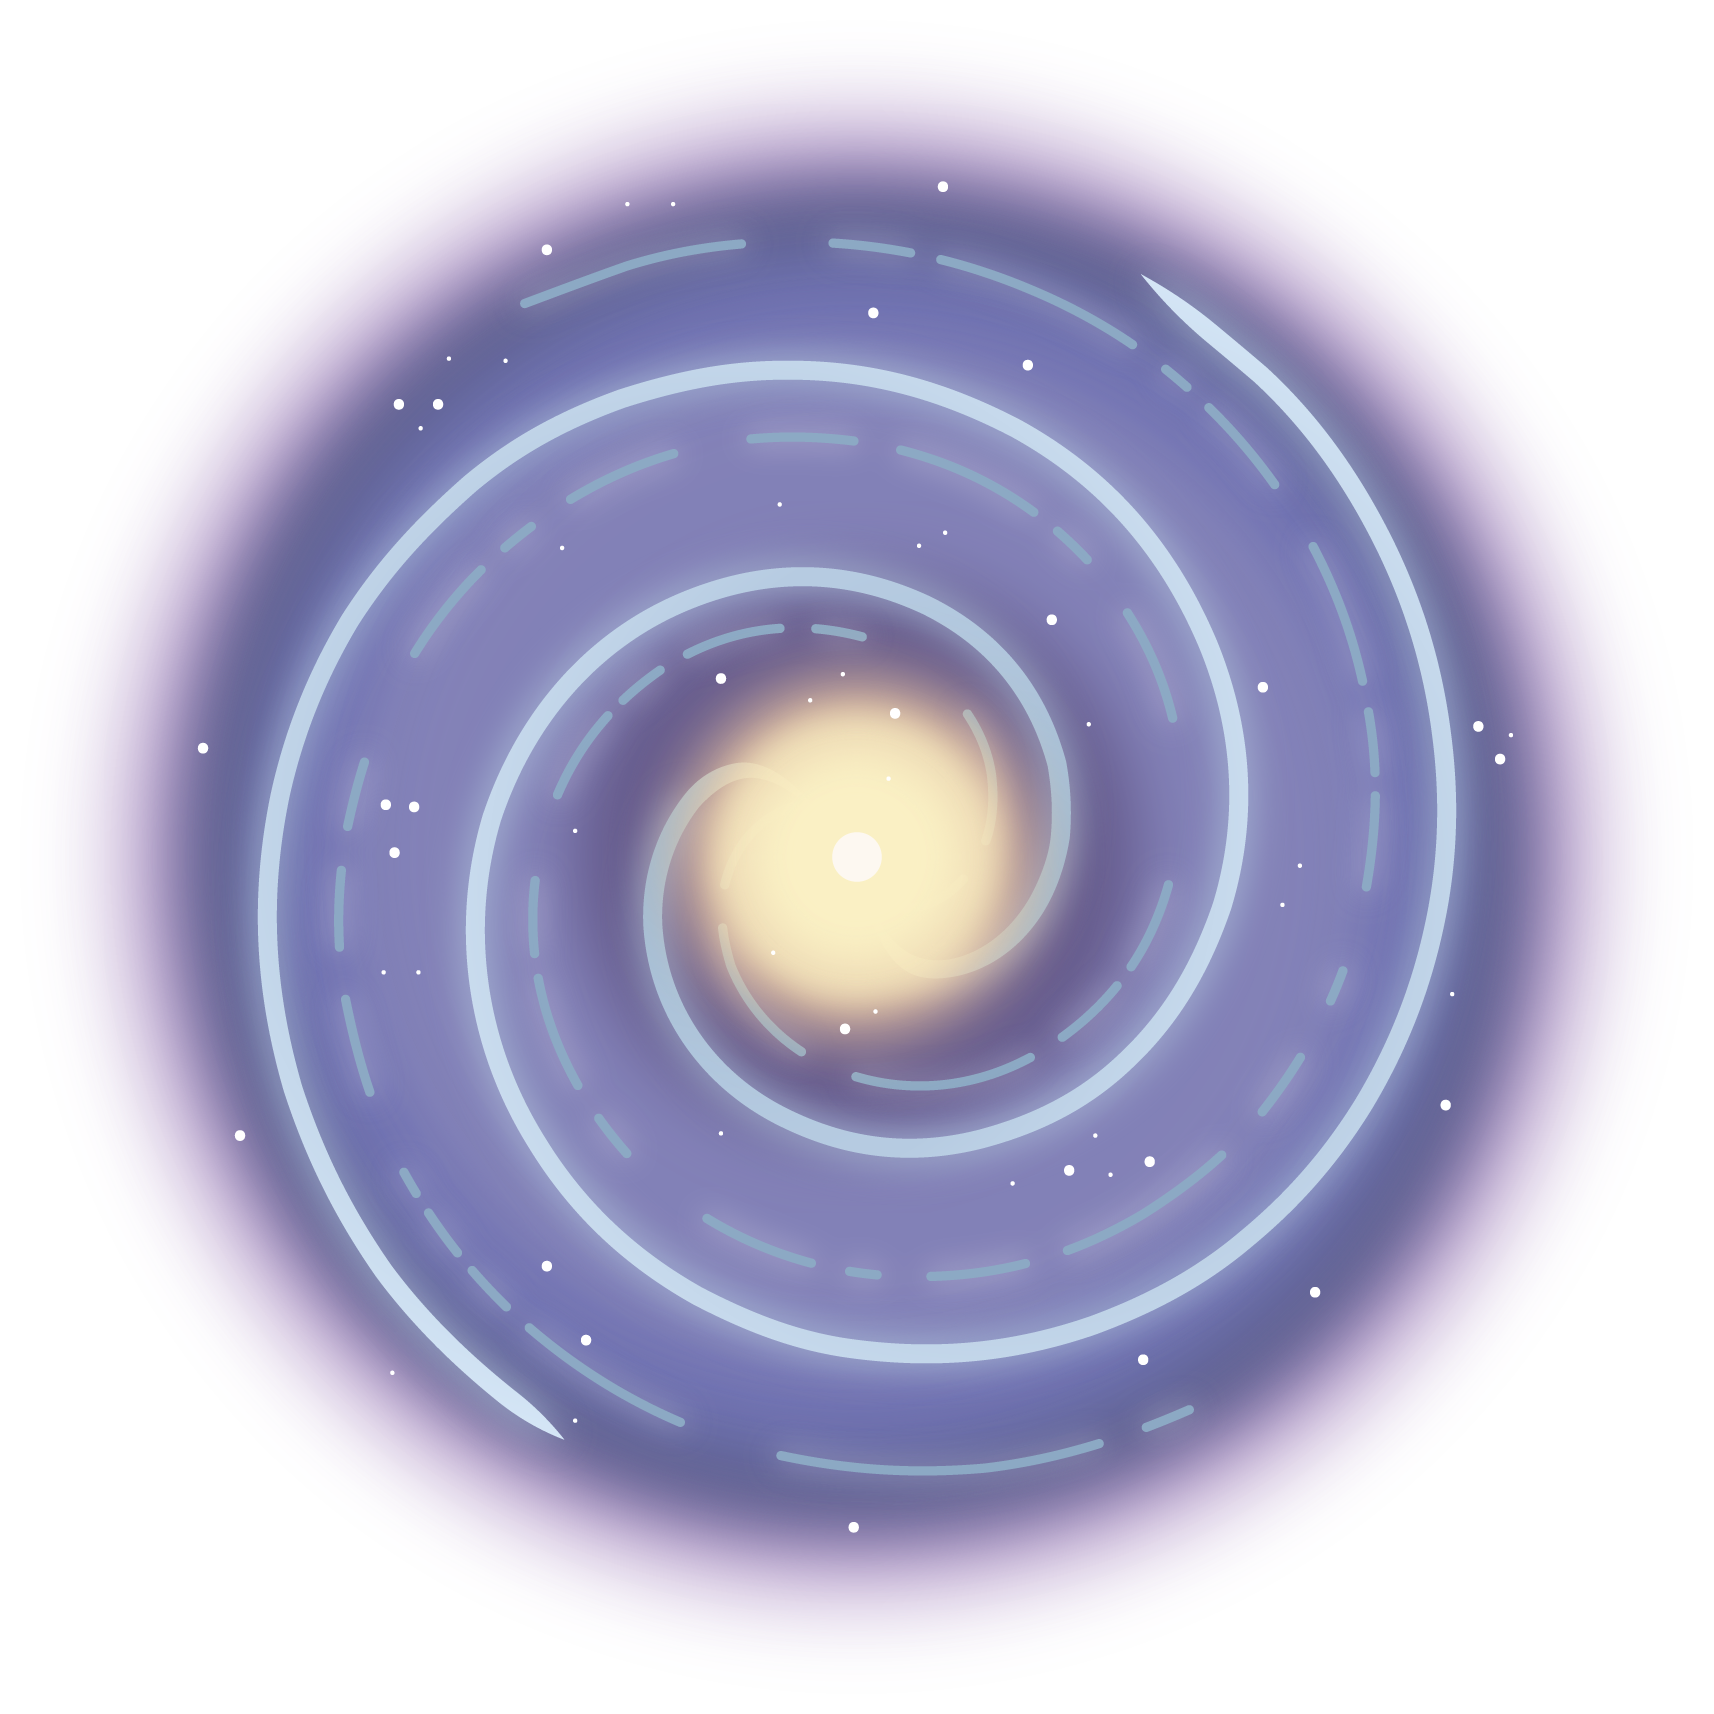 A hazy range of purples makes up the base of this swirling spiral of light blue lines twirling inward toward a yellow cloud with a white spot in the center. White dots representing stars speckle the image. 